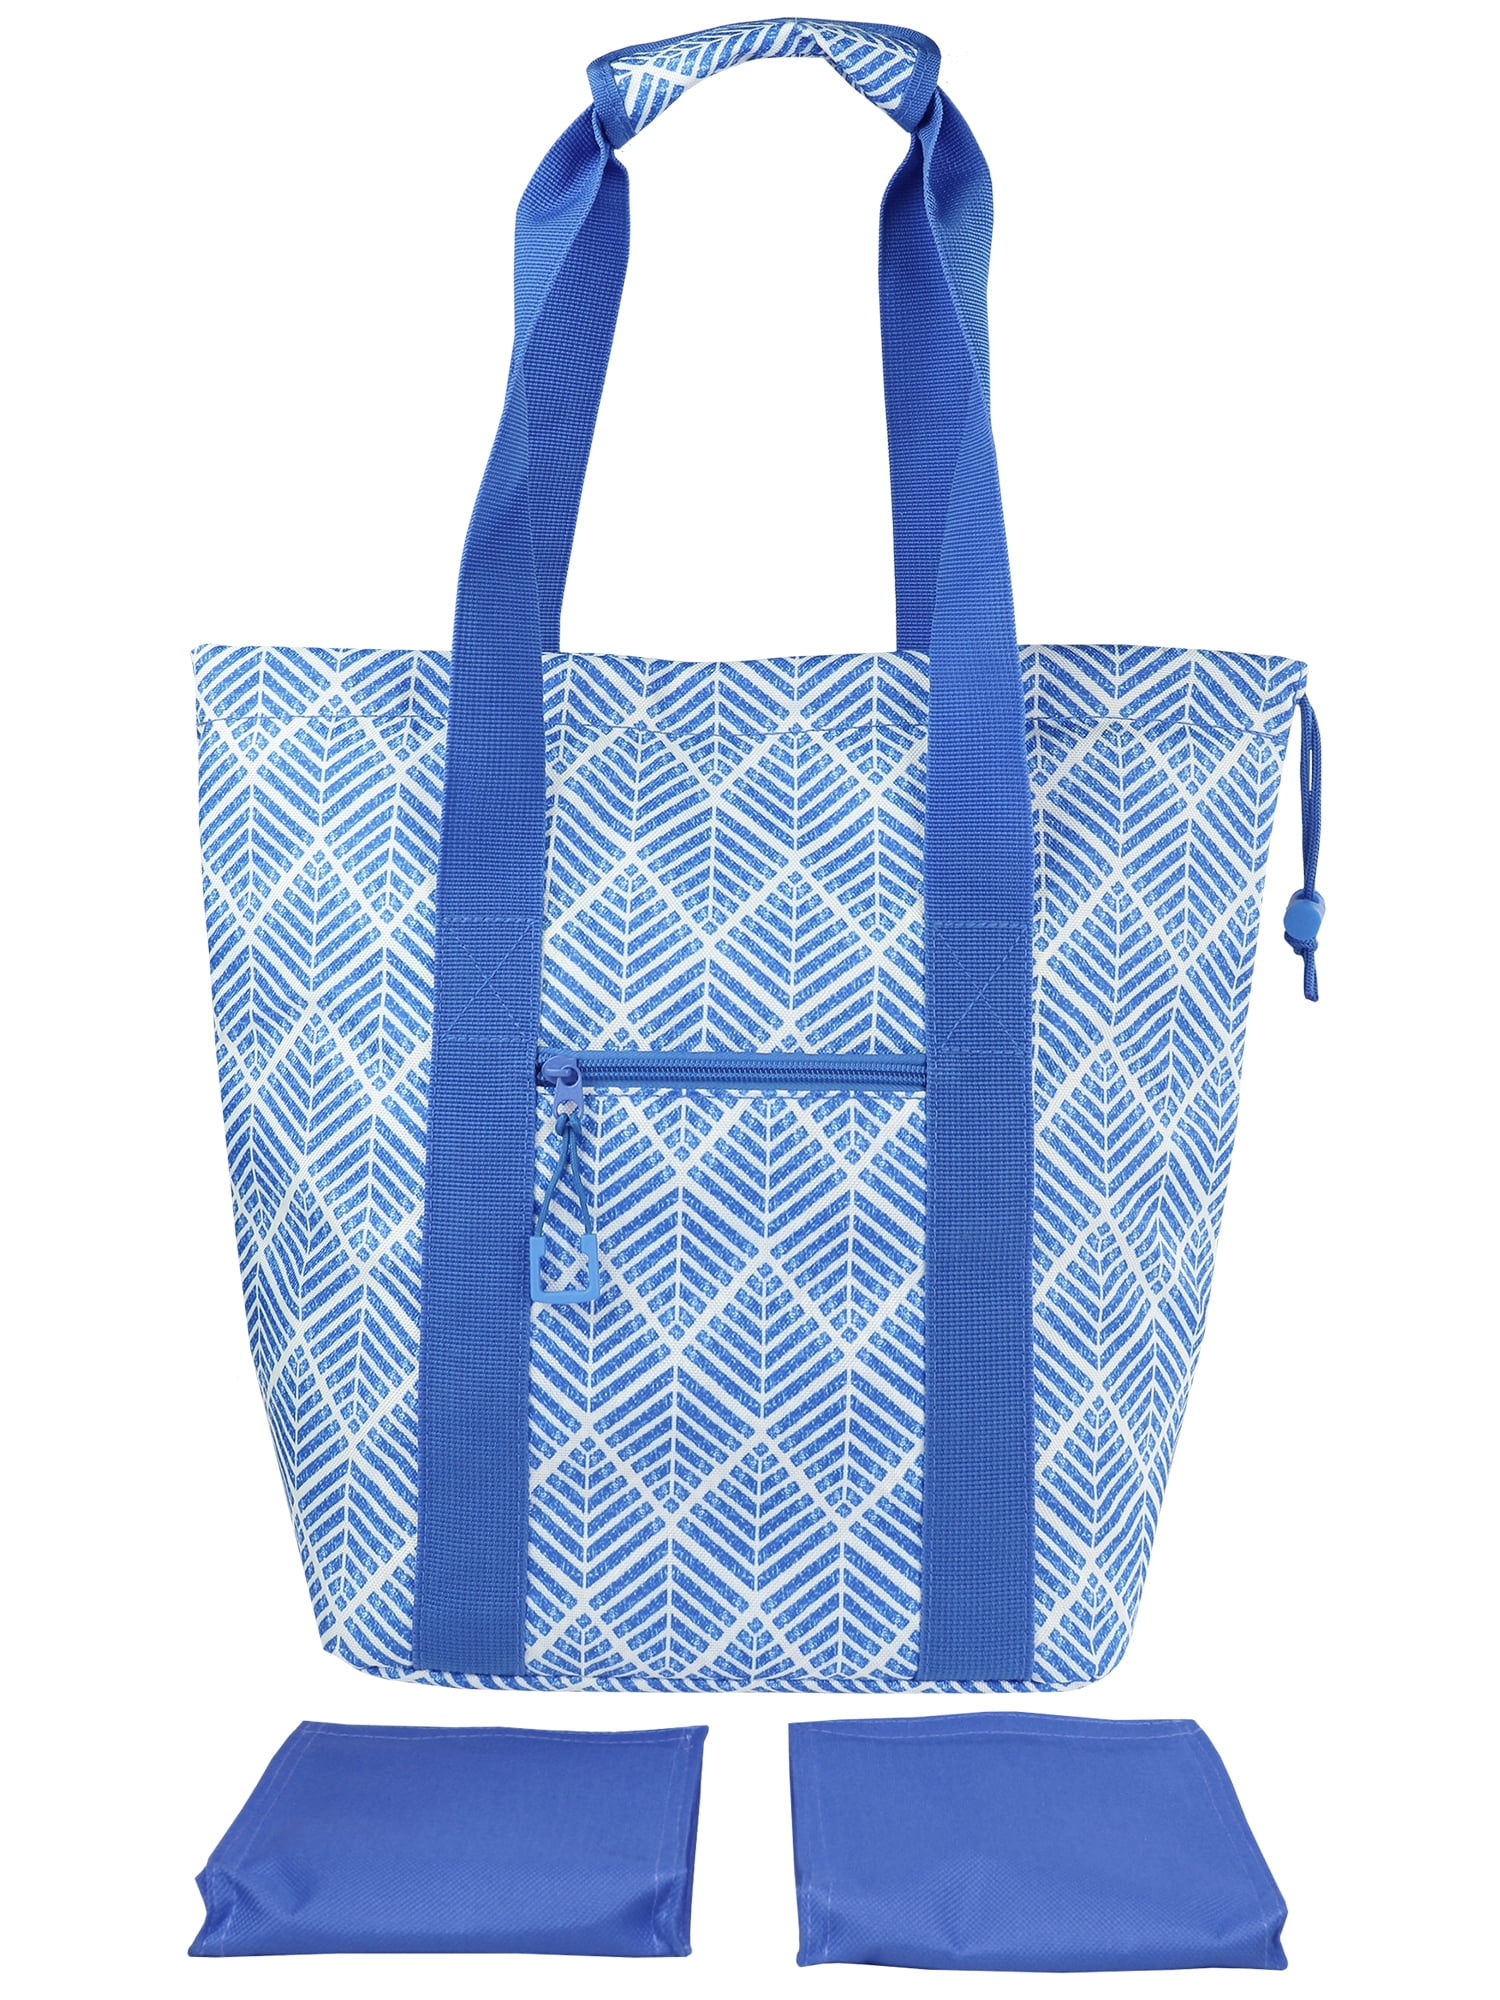 The Thermal Cinch Sac from Thirty-One; Available for a limited time in this  pattern!